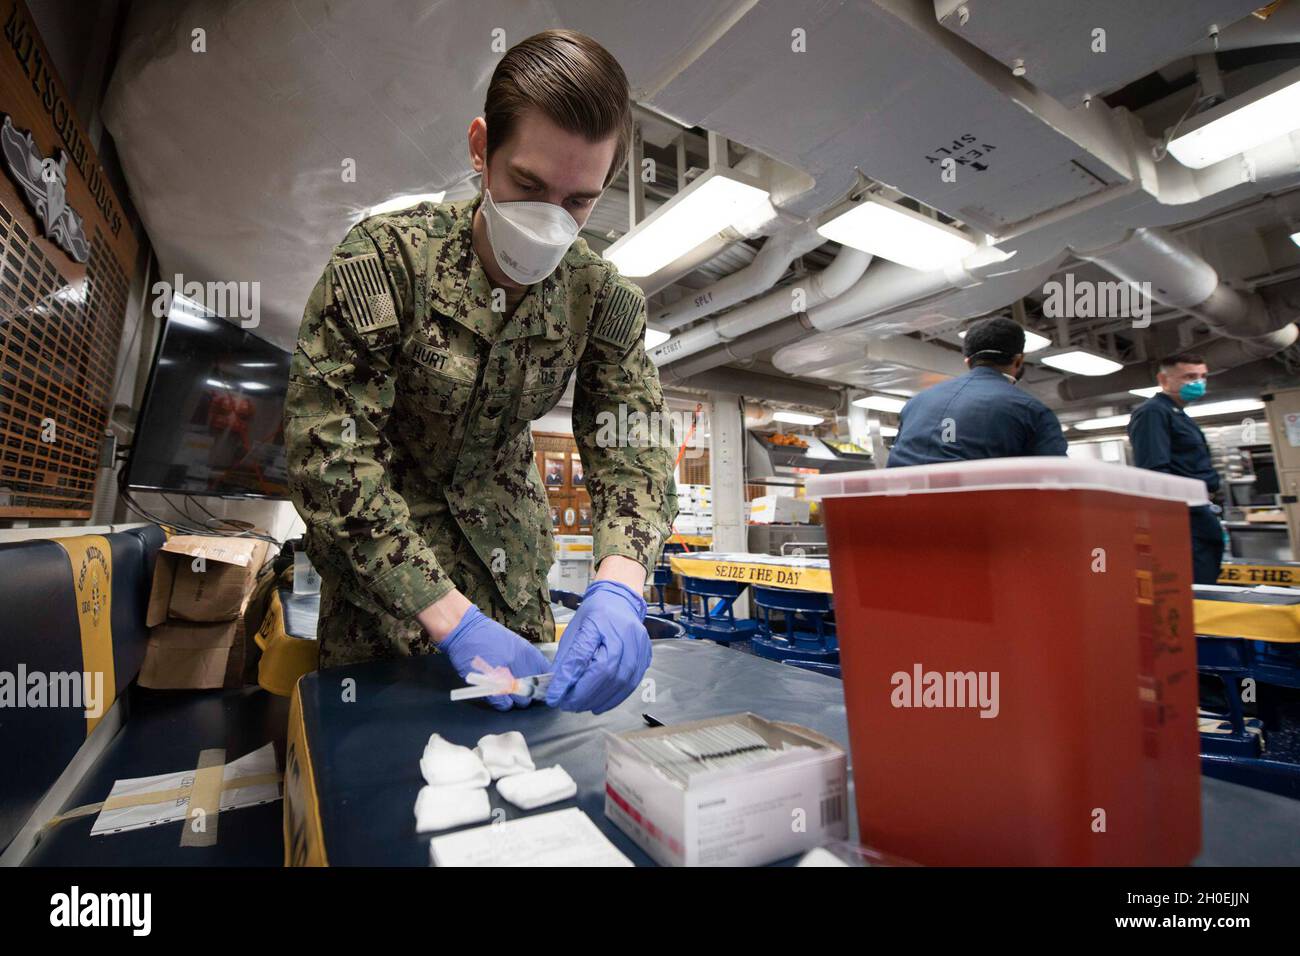 210213-N-QD512-1040 NORFOLK, Va. (Feb. 13, 2020) Hospital Corpsman 3rd Class Austin Hurt, from Las Vegas, prepares COVID-19 vaccinations aboard the Arleigh-Burke class guided-missile destroyer USS Mitscher (DDG 57). Mitscher is currently pier side conducting routine maintenance. Stock Photo